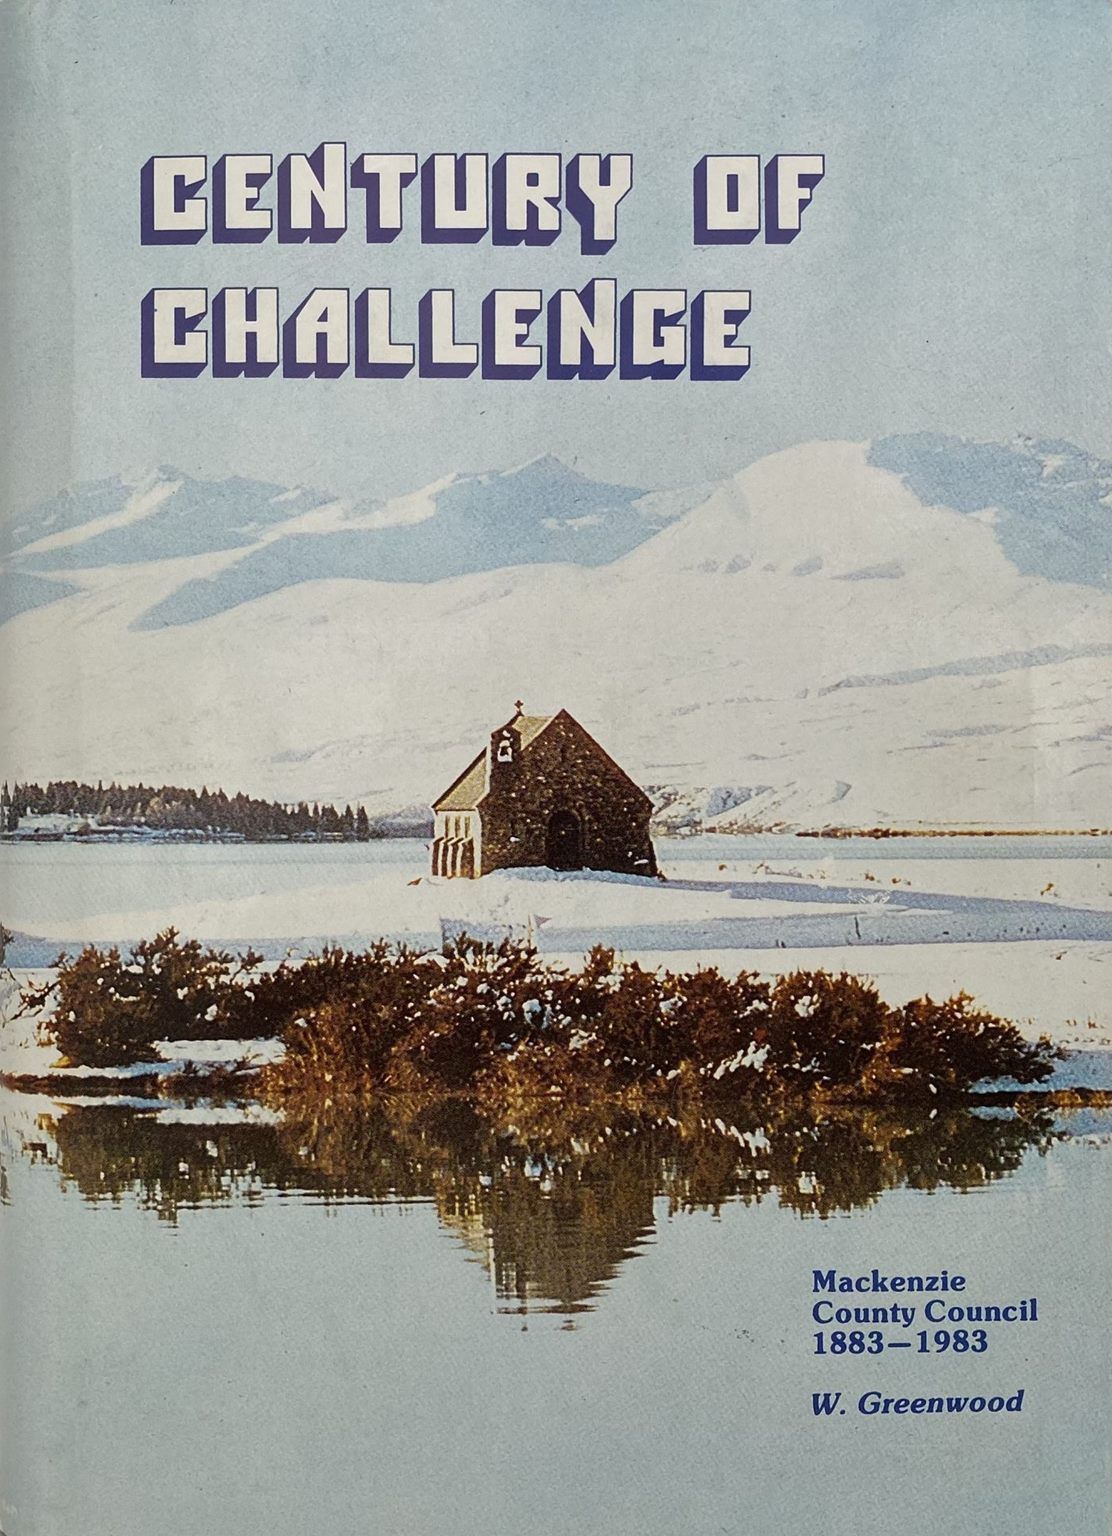 CENTURY OF CHALLENGE: History of Mackenzie County Council 1883-1983